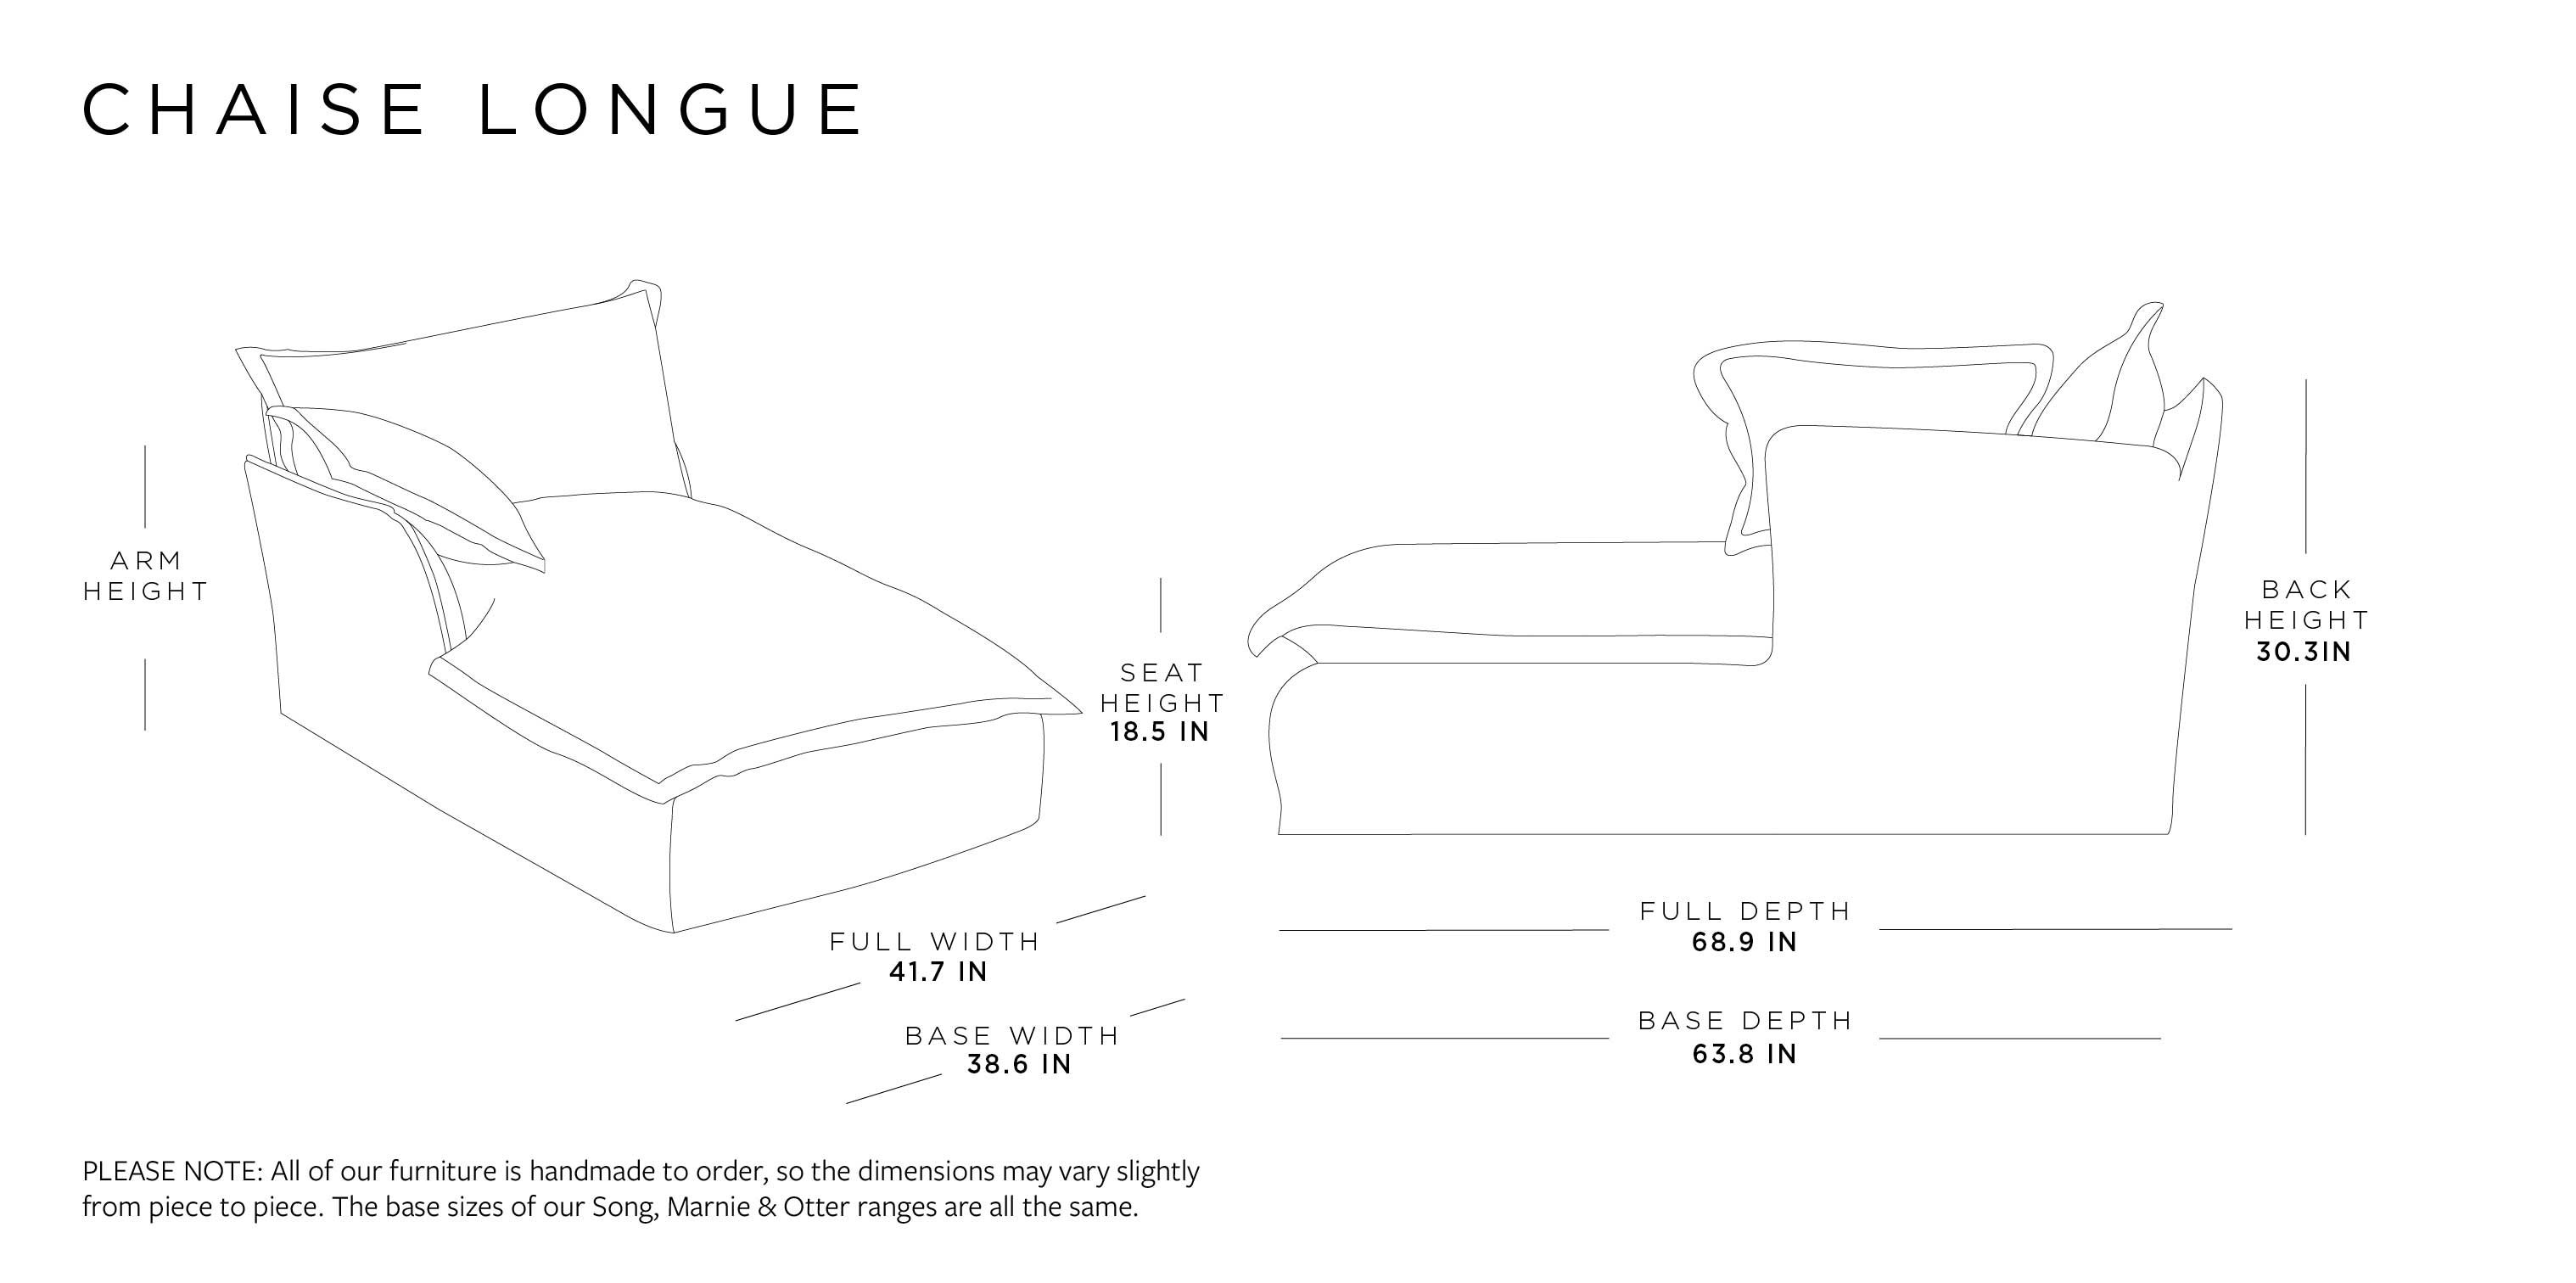 Chaise Longue | Song Range Size Guide